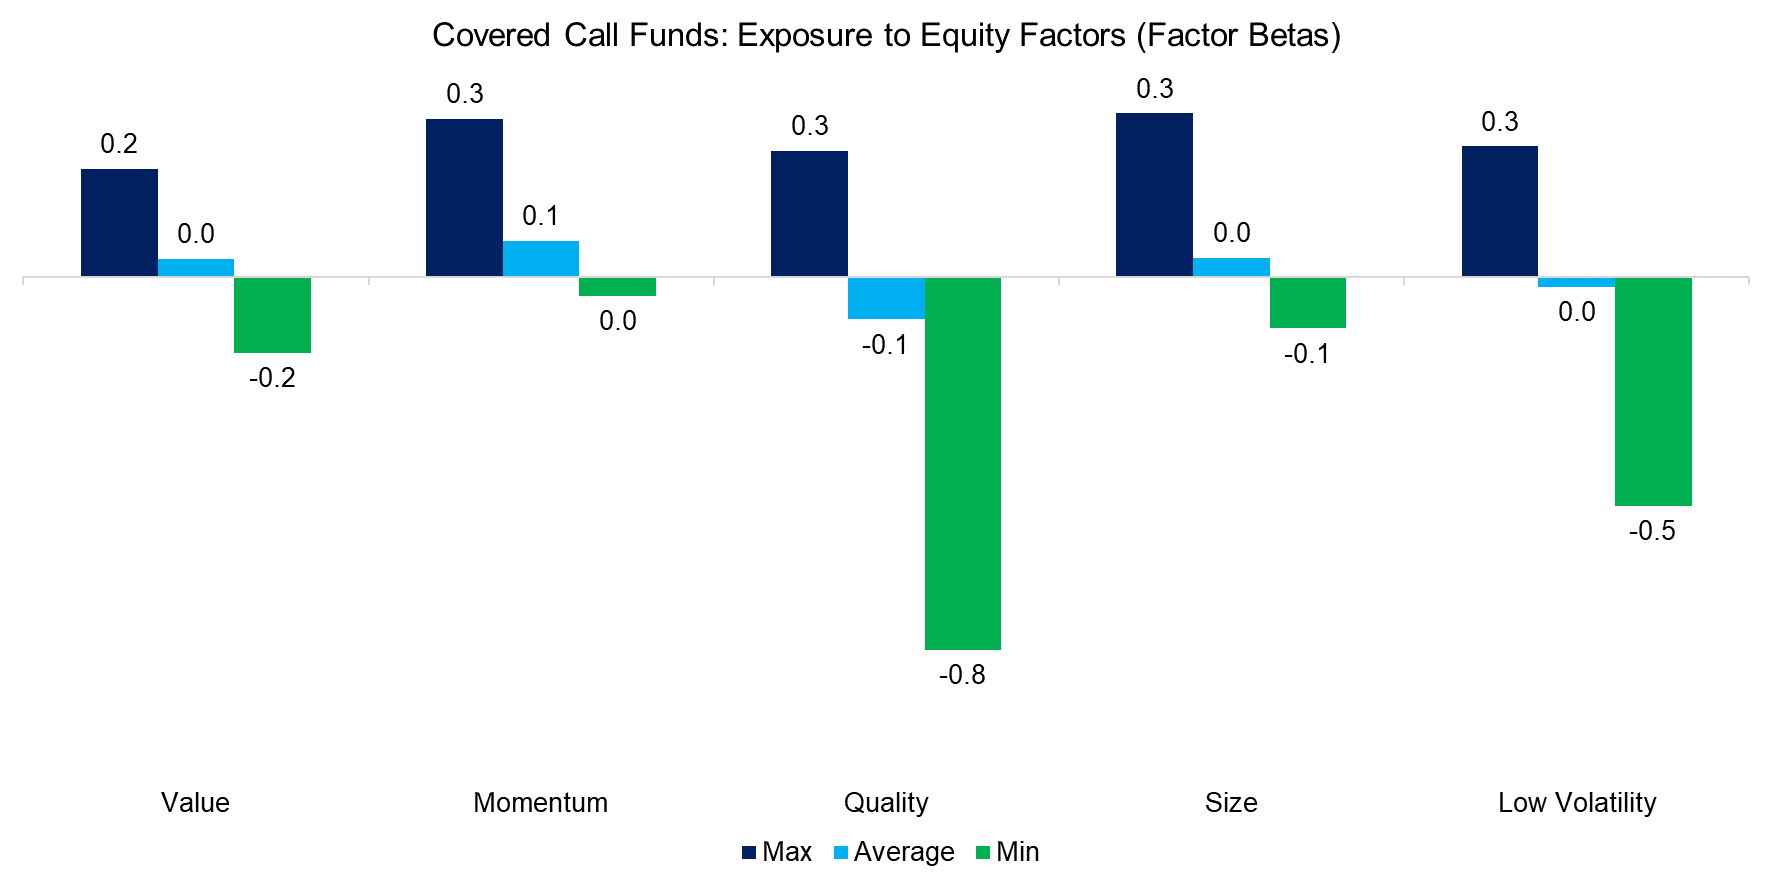 Covered Call Funds Exposure to Equity Factors (Factor Betas)